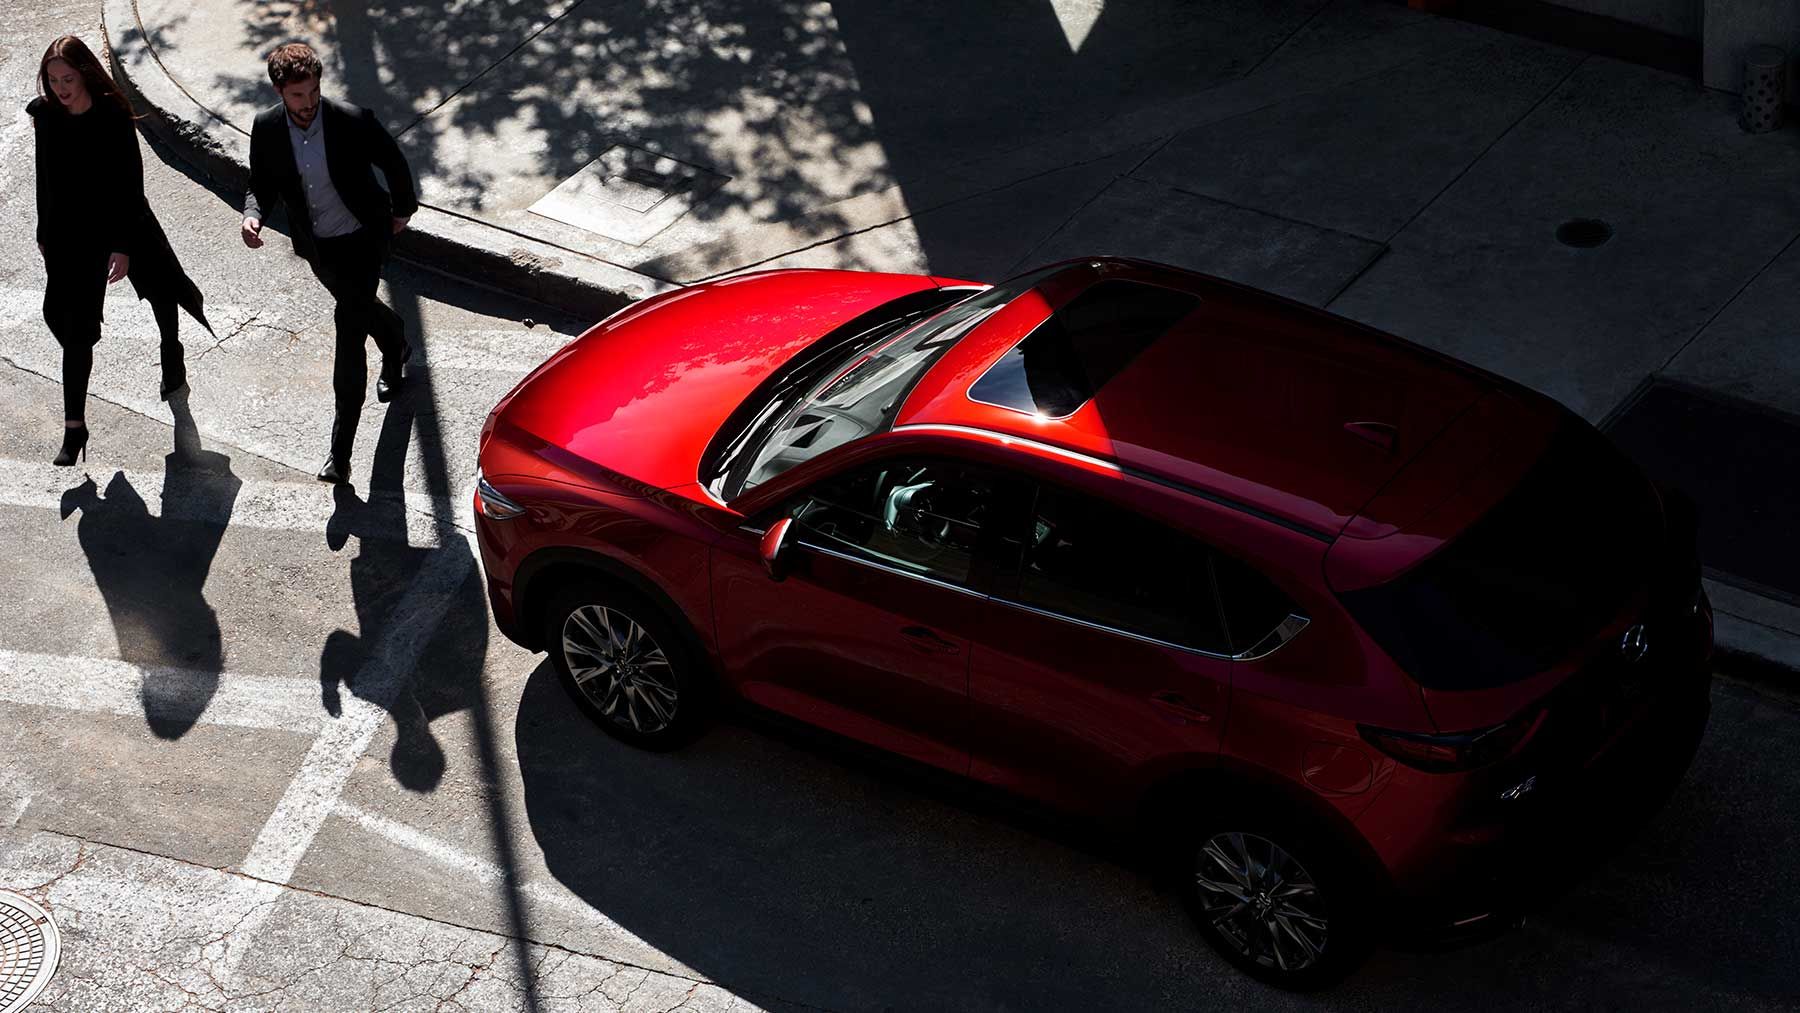 The 2019 Mazda CX-5 Is a Fearlessly Agile and Beautifully Designed Compact SUV